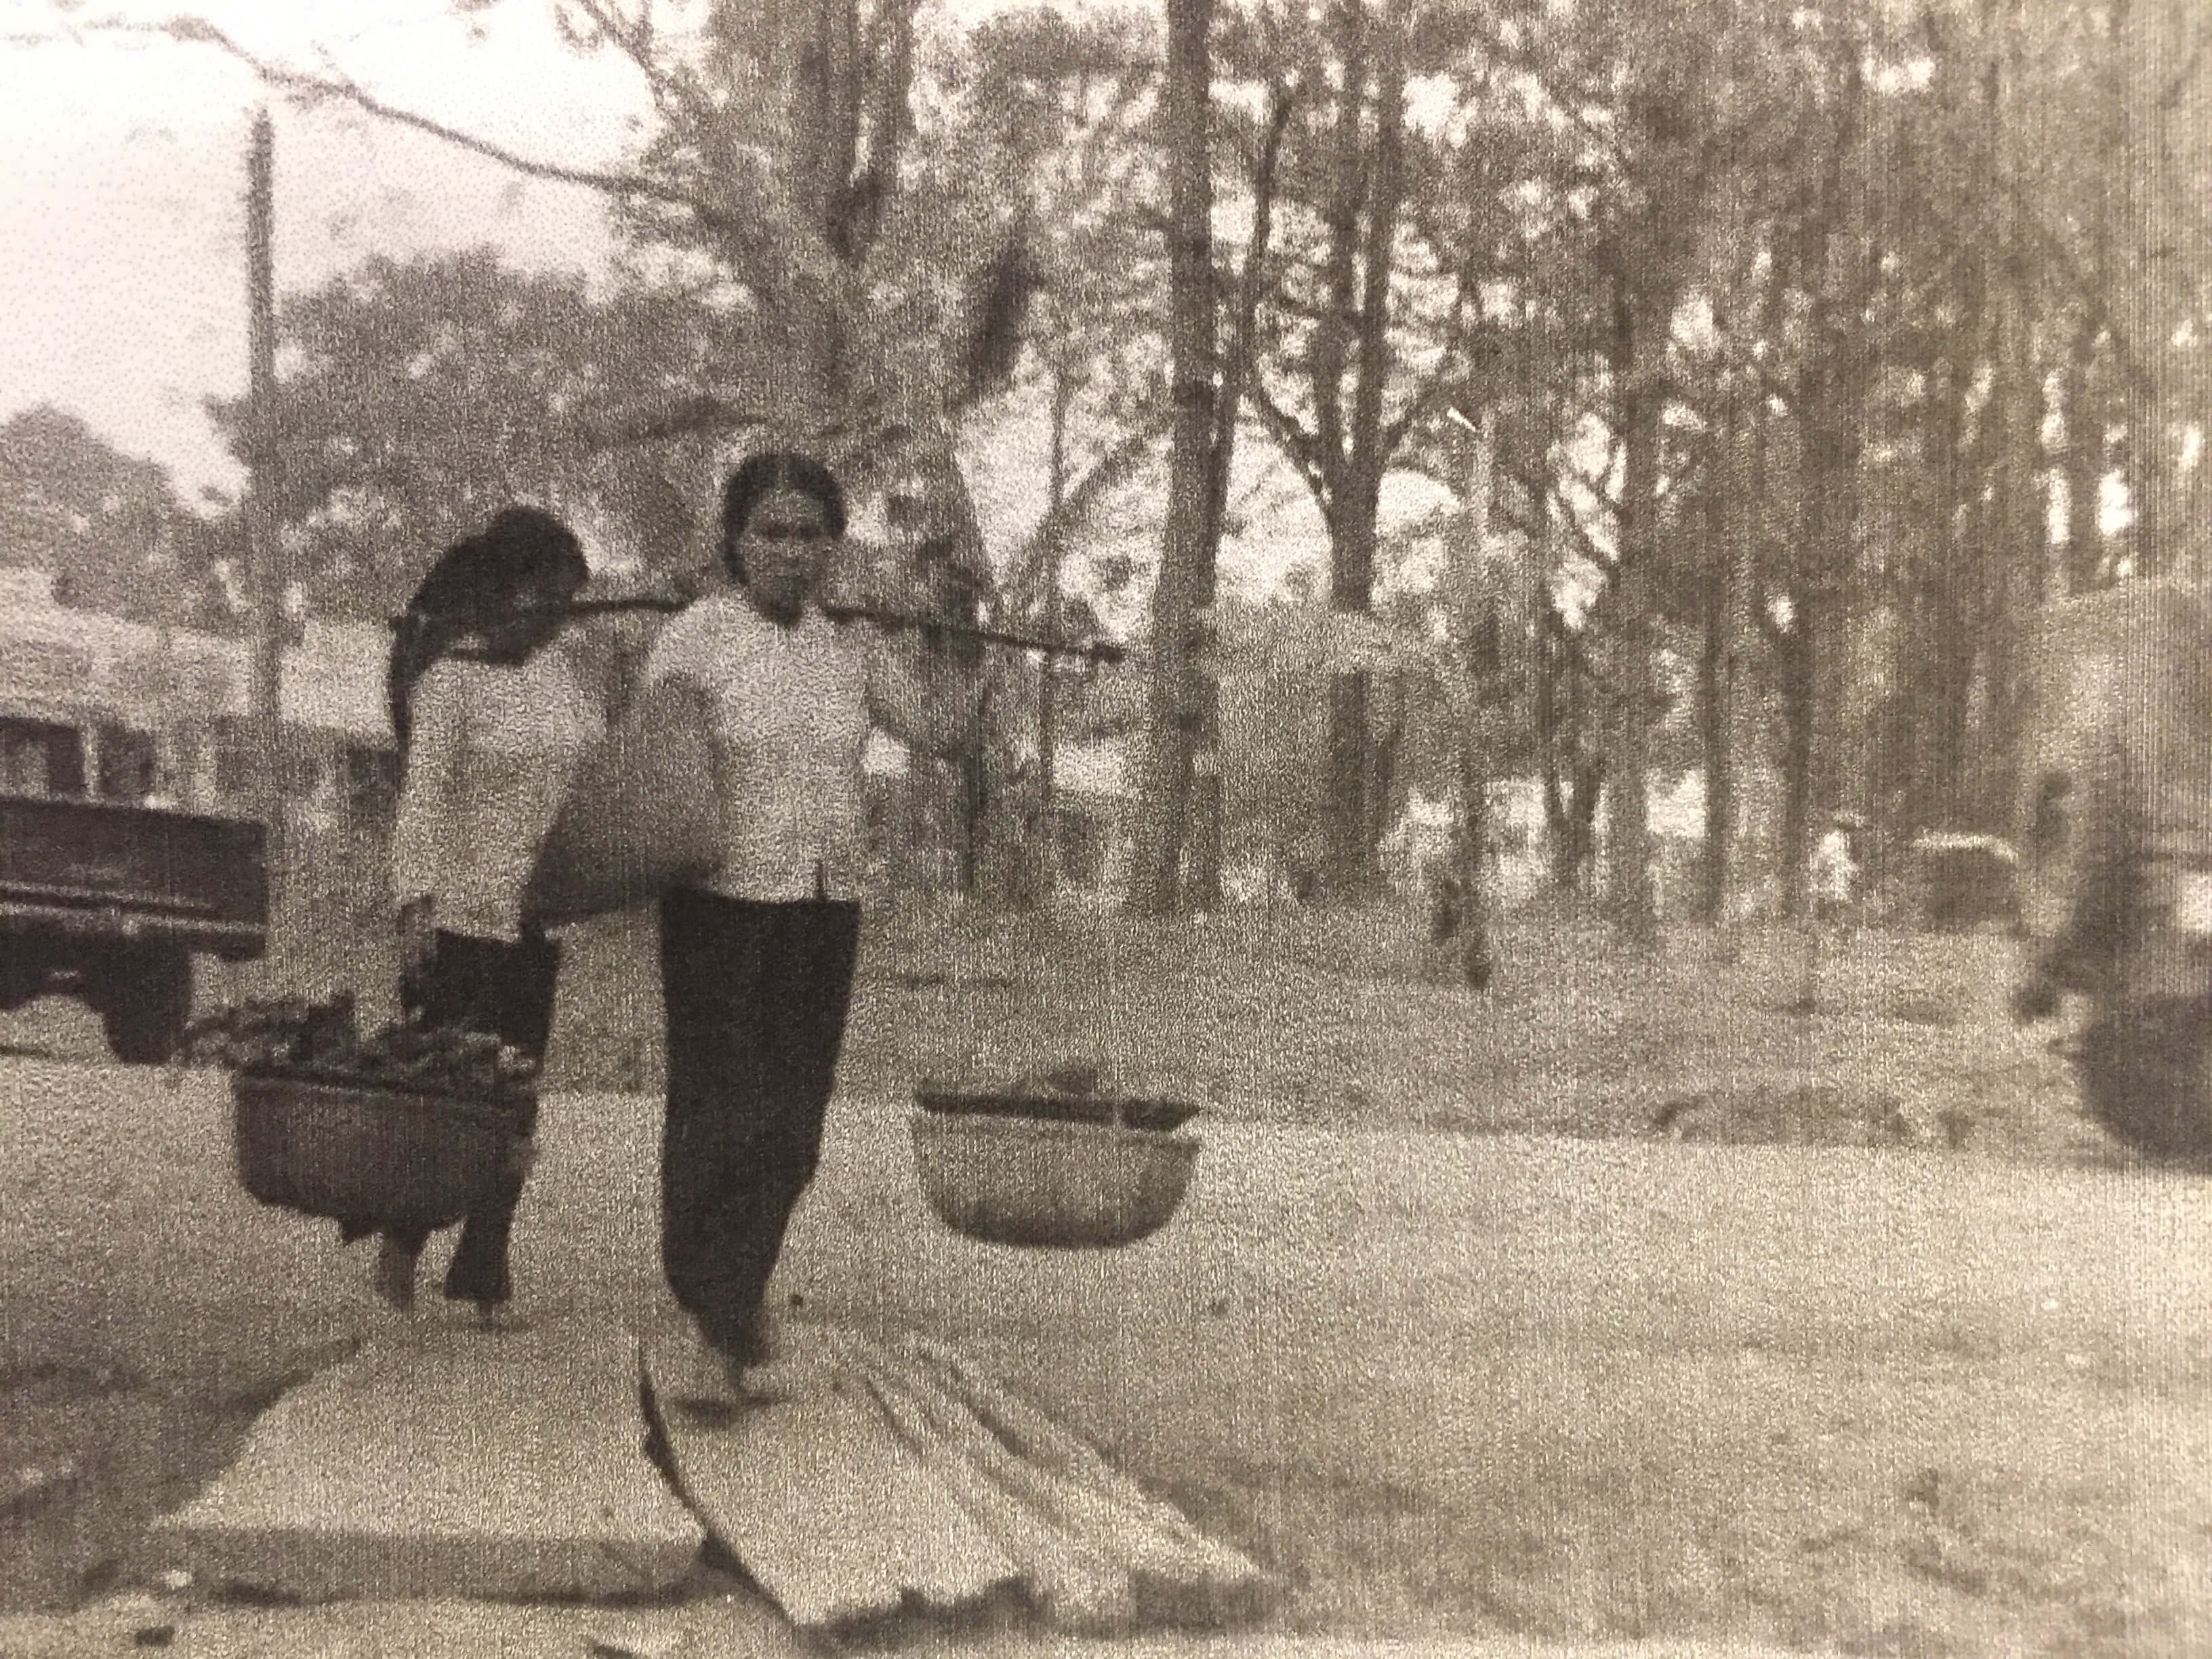 Two older Asian women on the street, one carrying a yoked basket full of food.